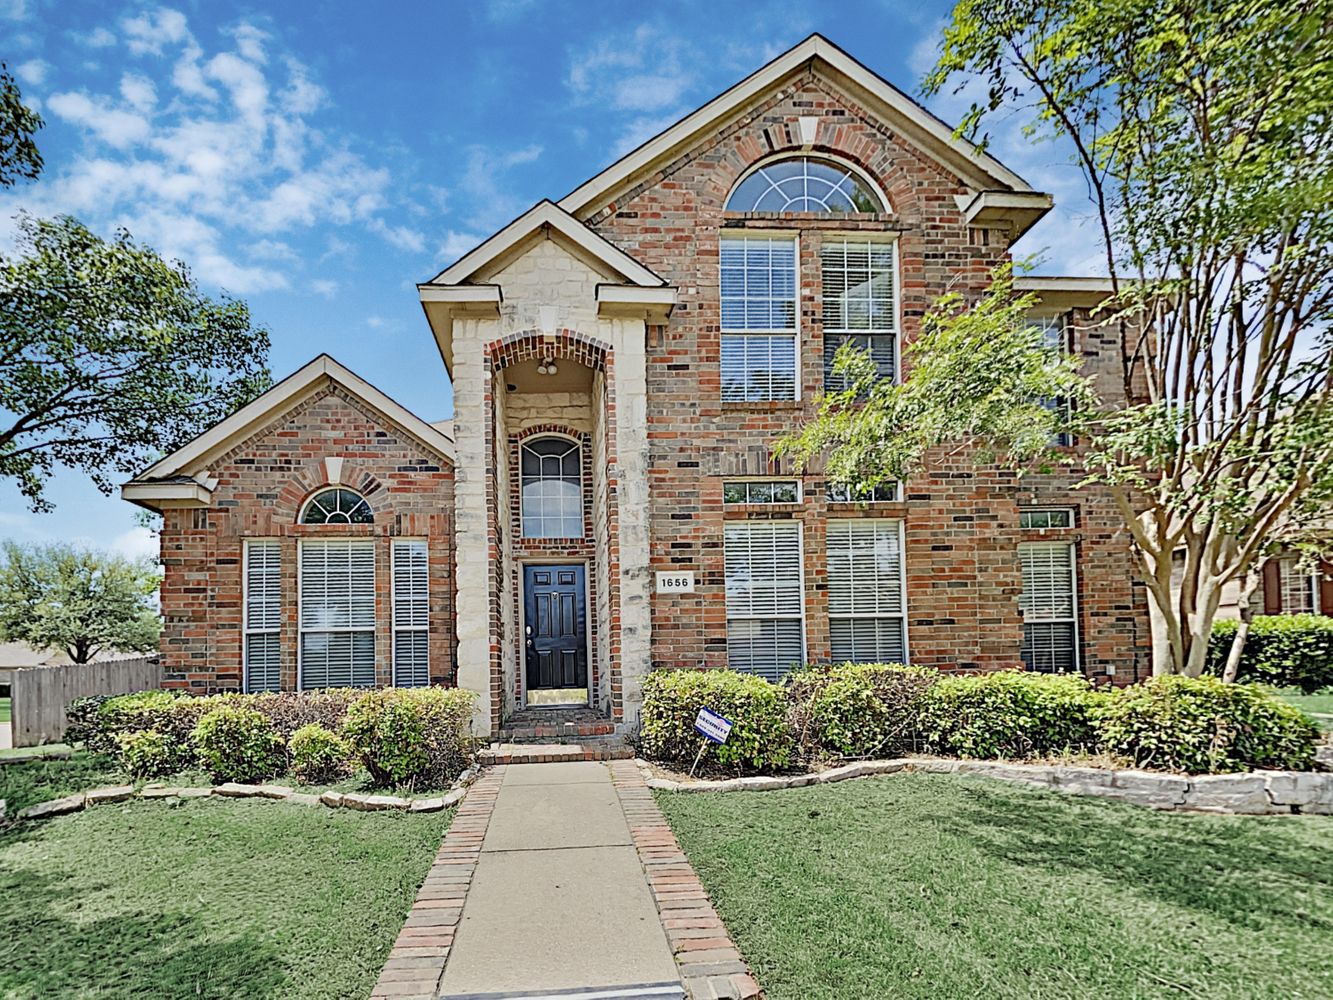 Grand home with high ceilings and many windows at Invitation Homes Dallas.